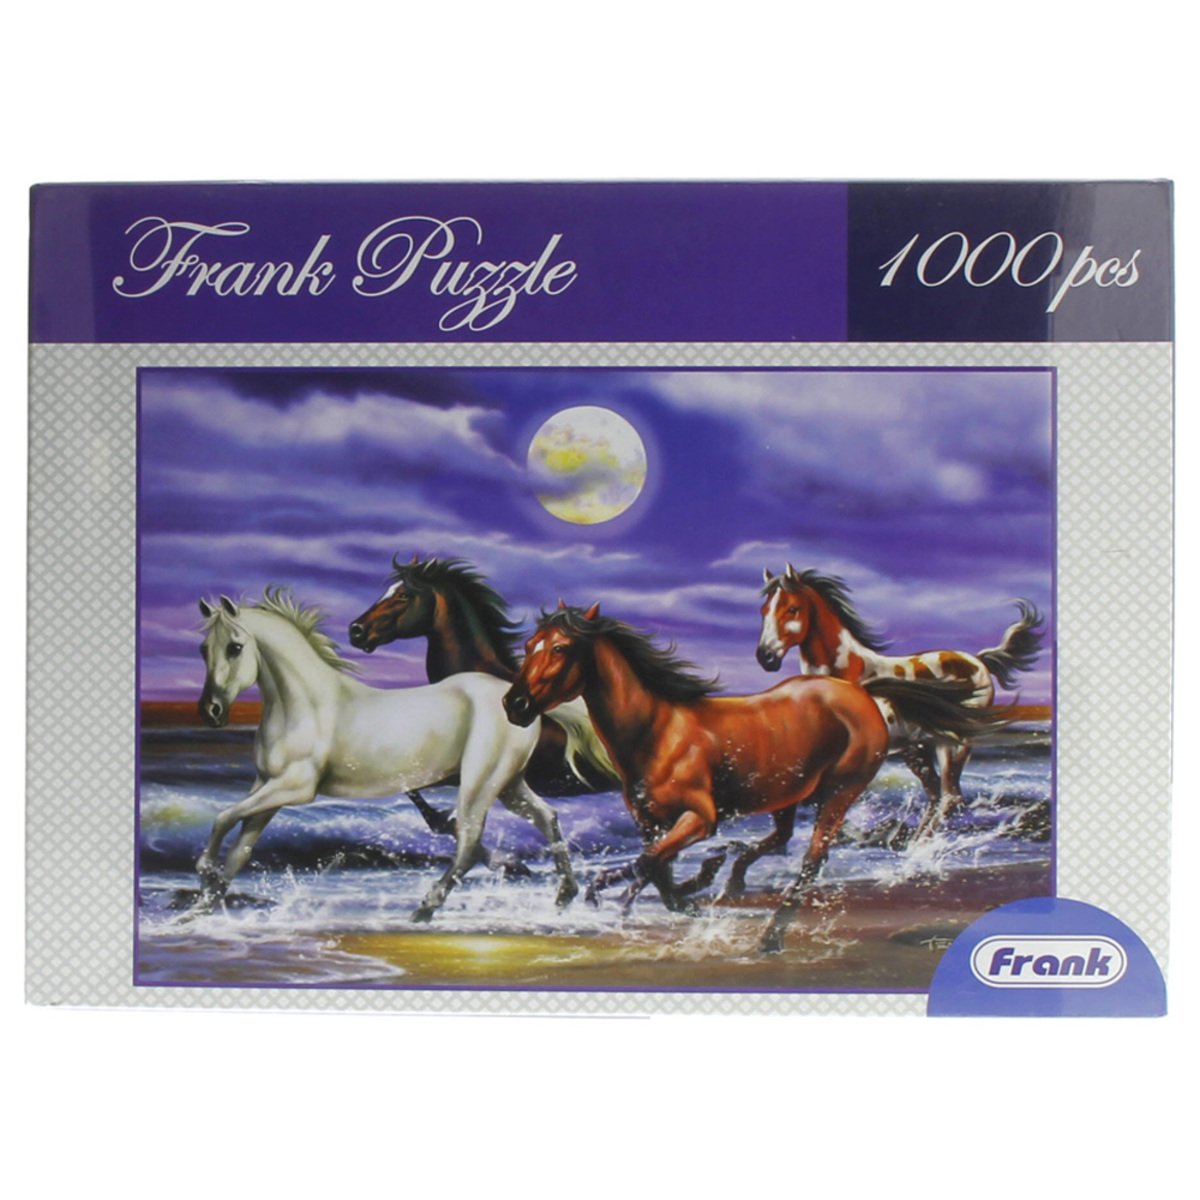 Frank Puzzle 1000 pieces Assorted